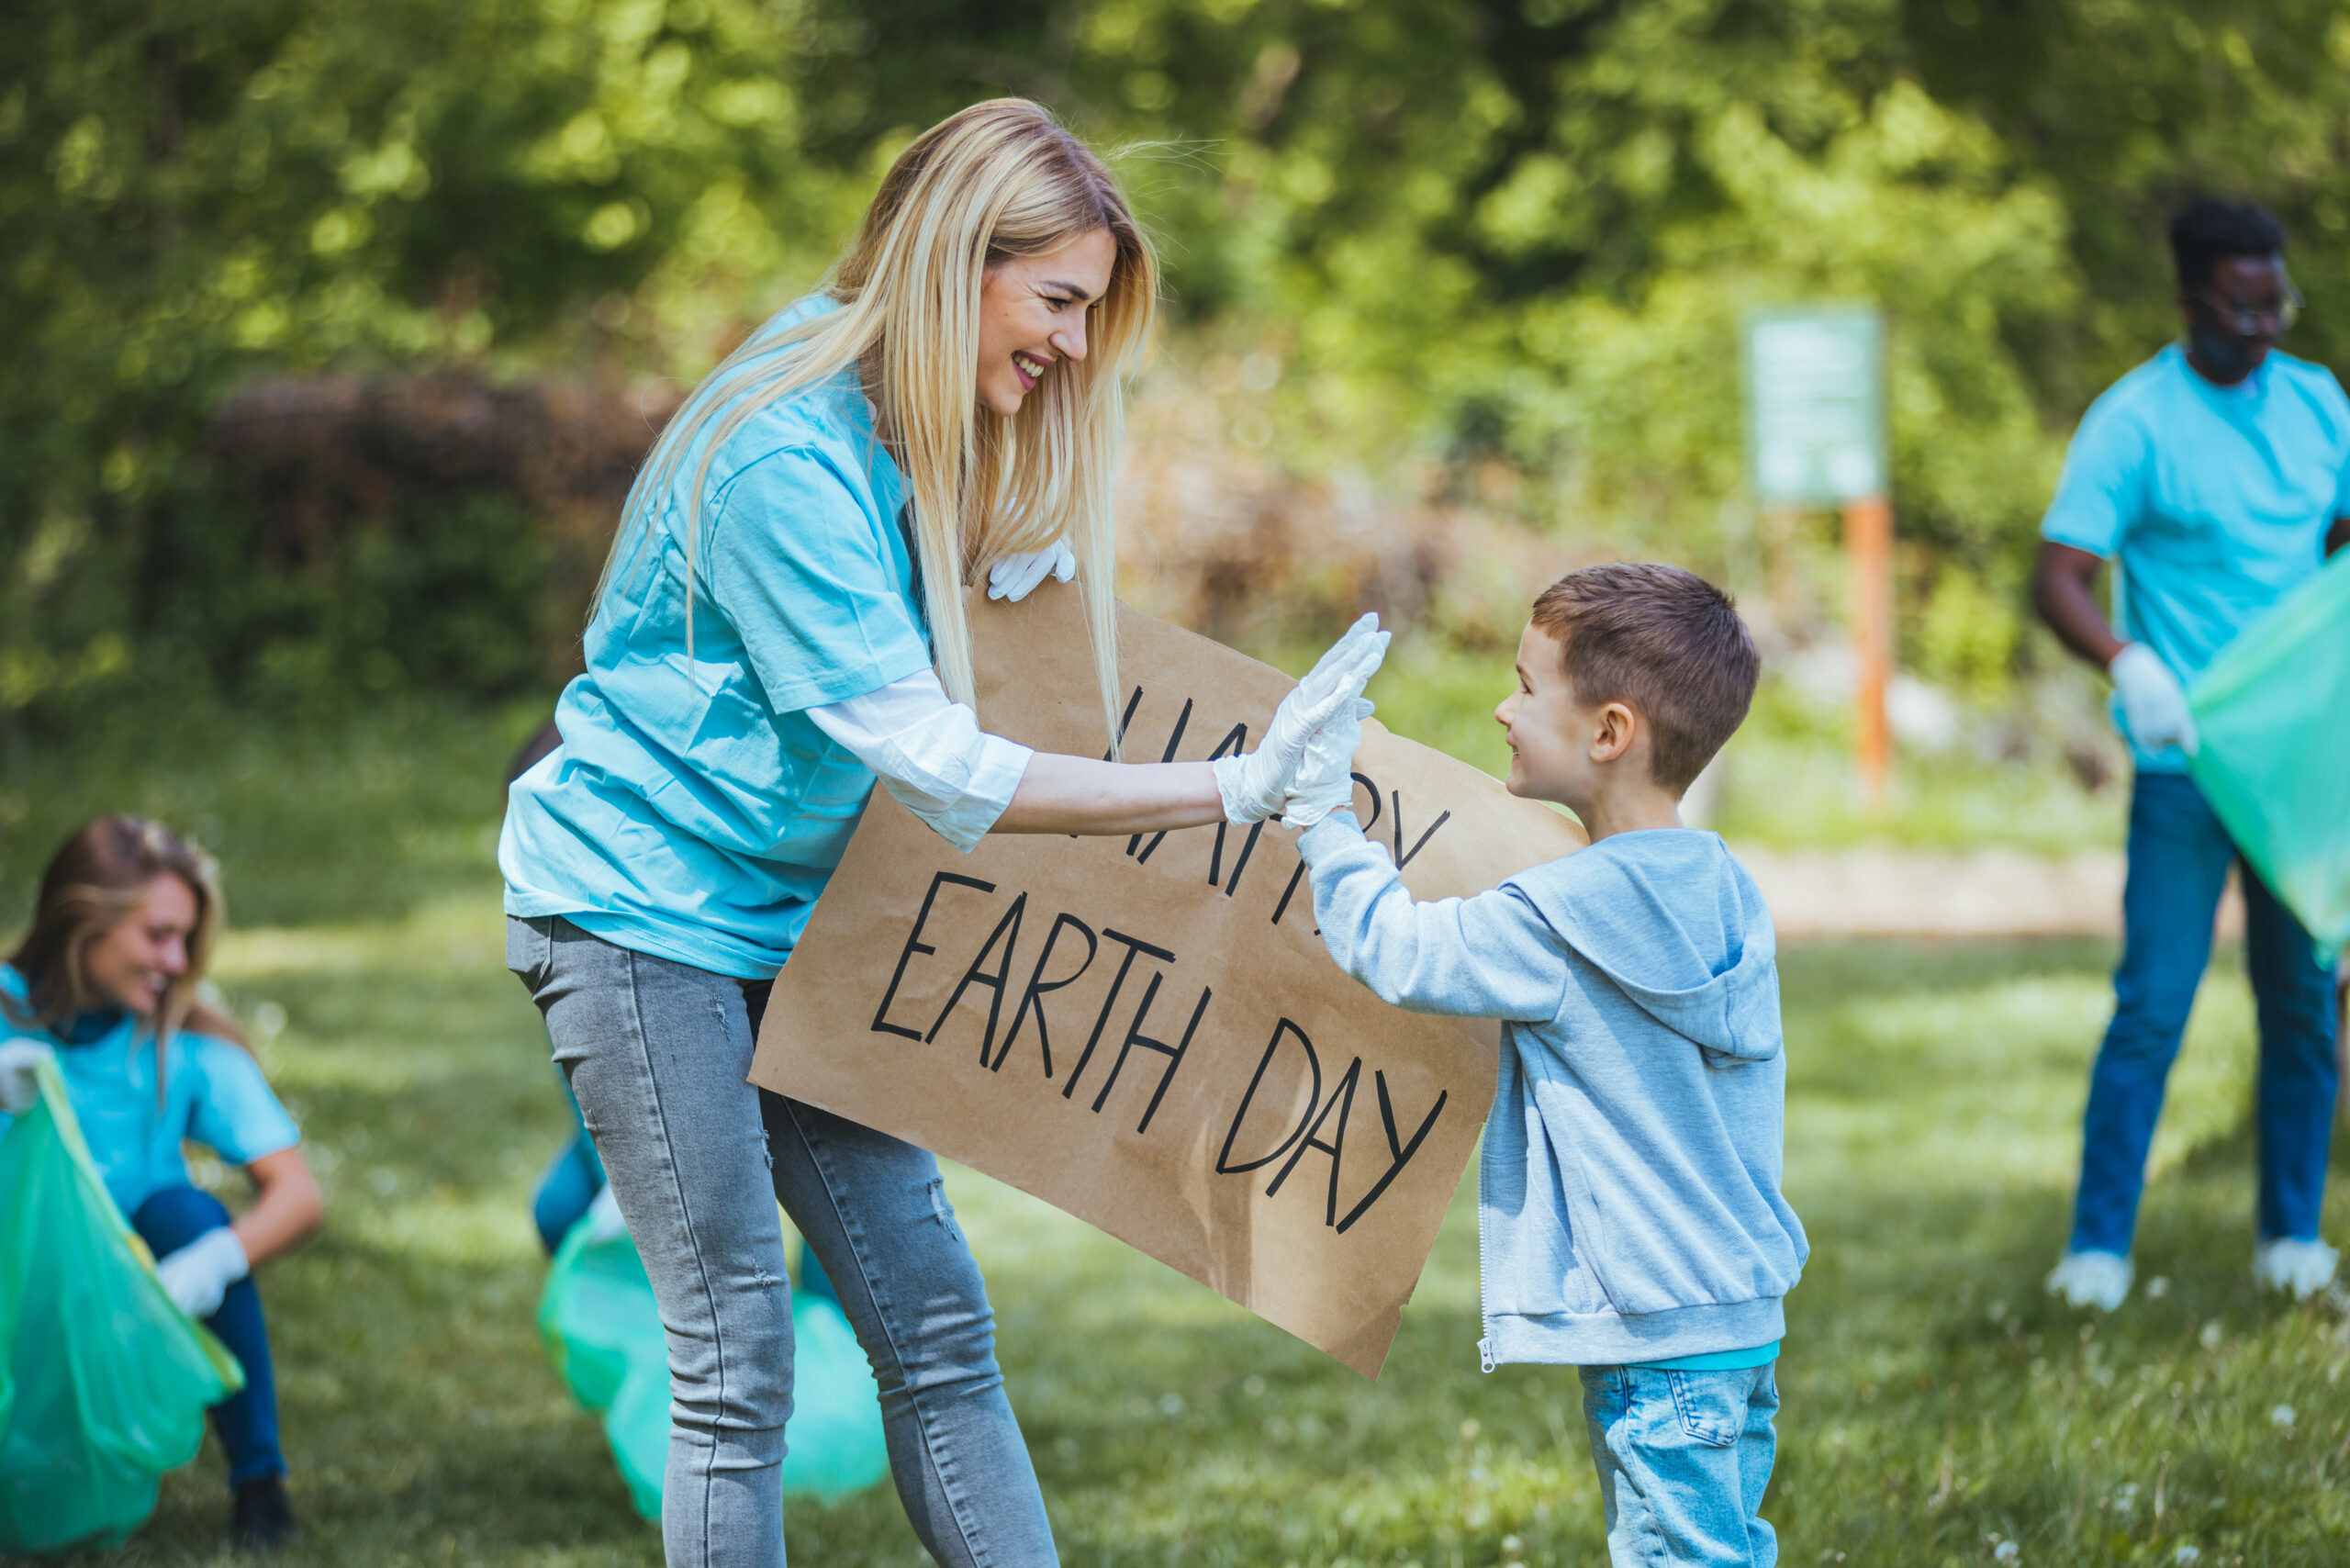 Eco-Friendly Homes: Celebrating Earth Day with Sustainable Living